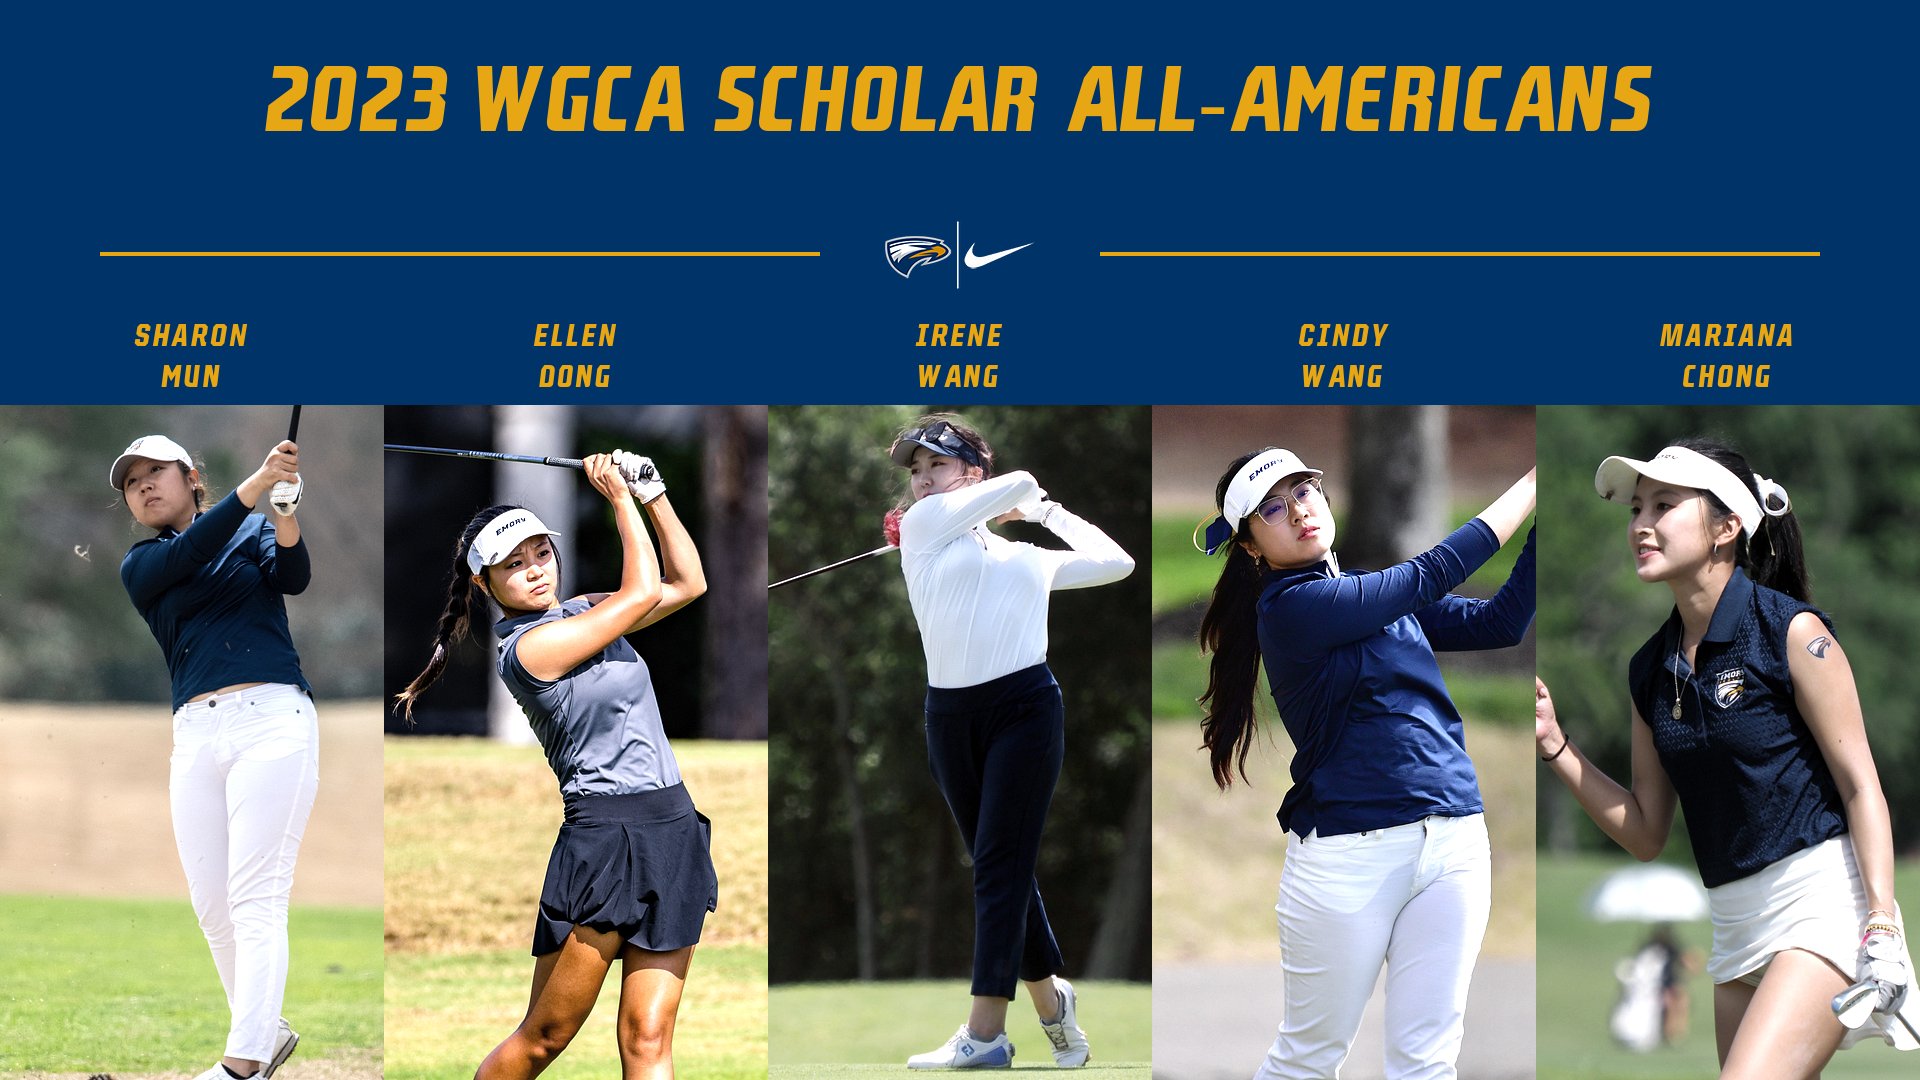 Five from Women's Golf Named as WGCA Scholar All-Americans